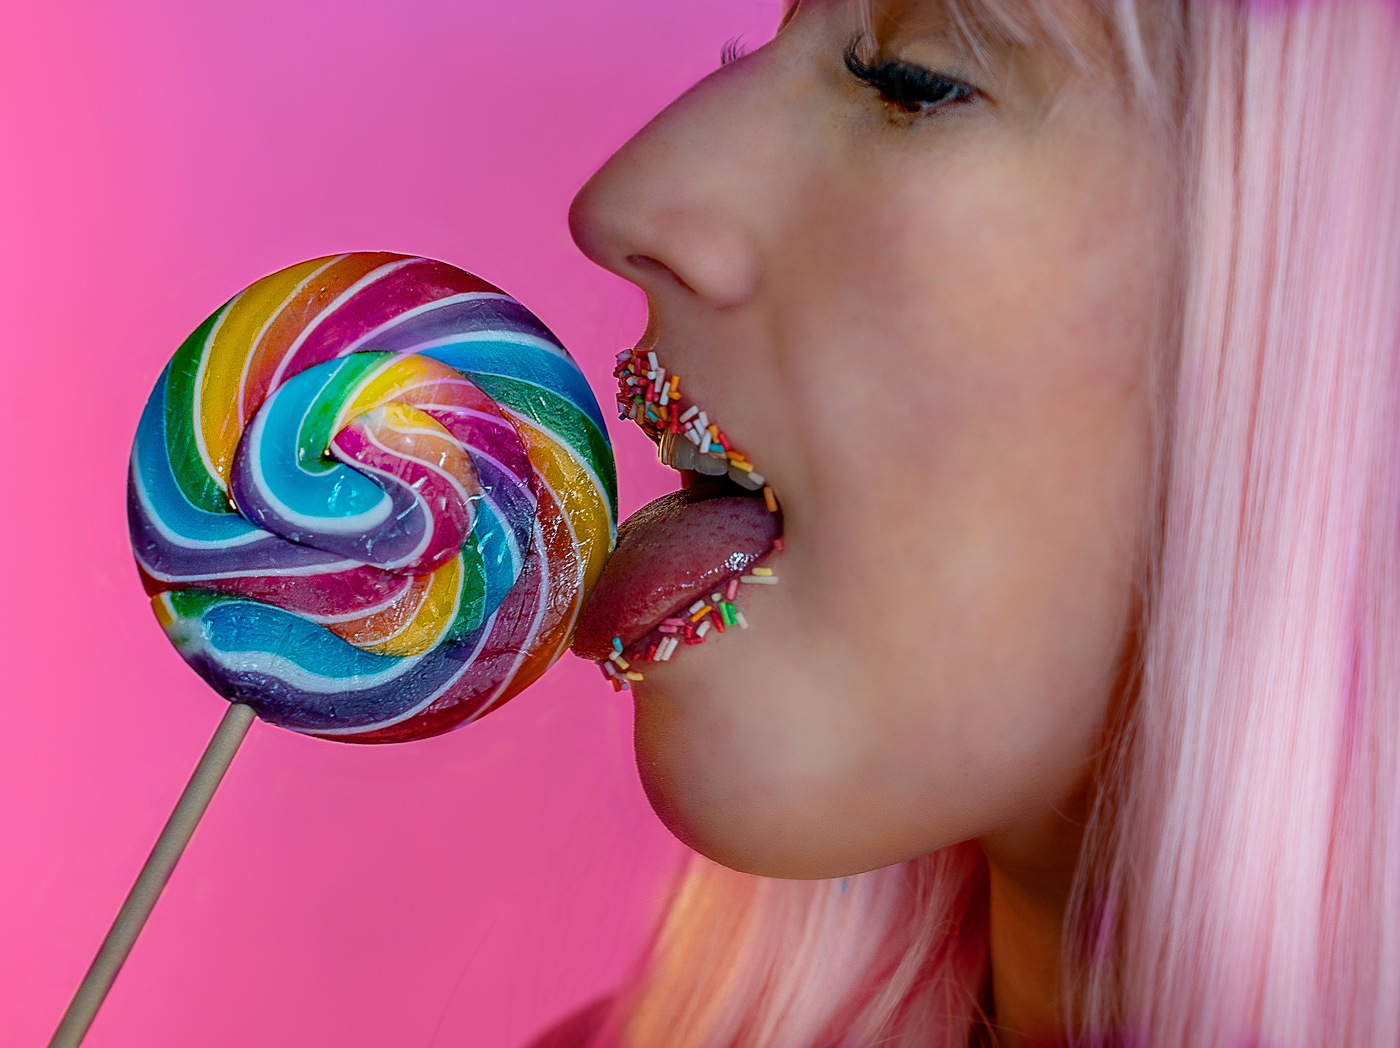 Candyqueen